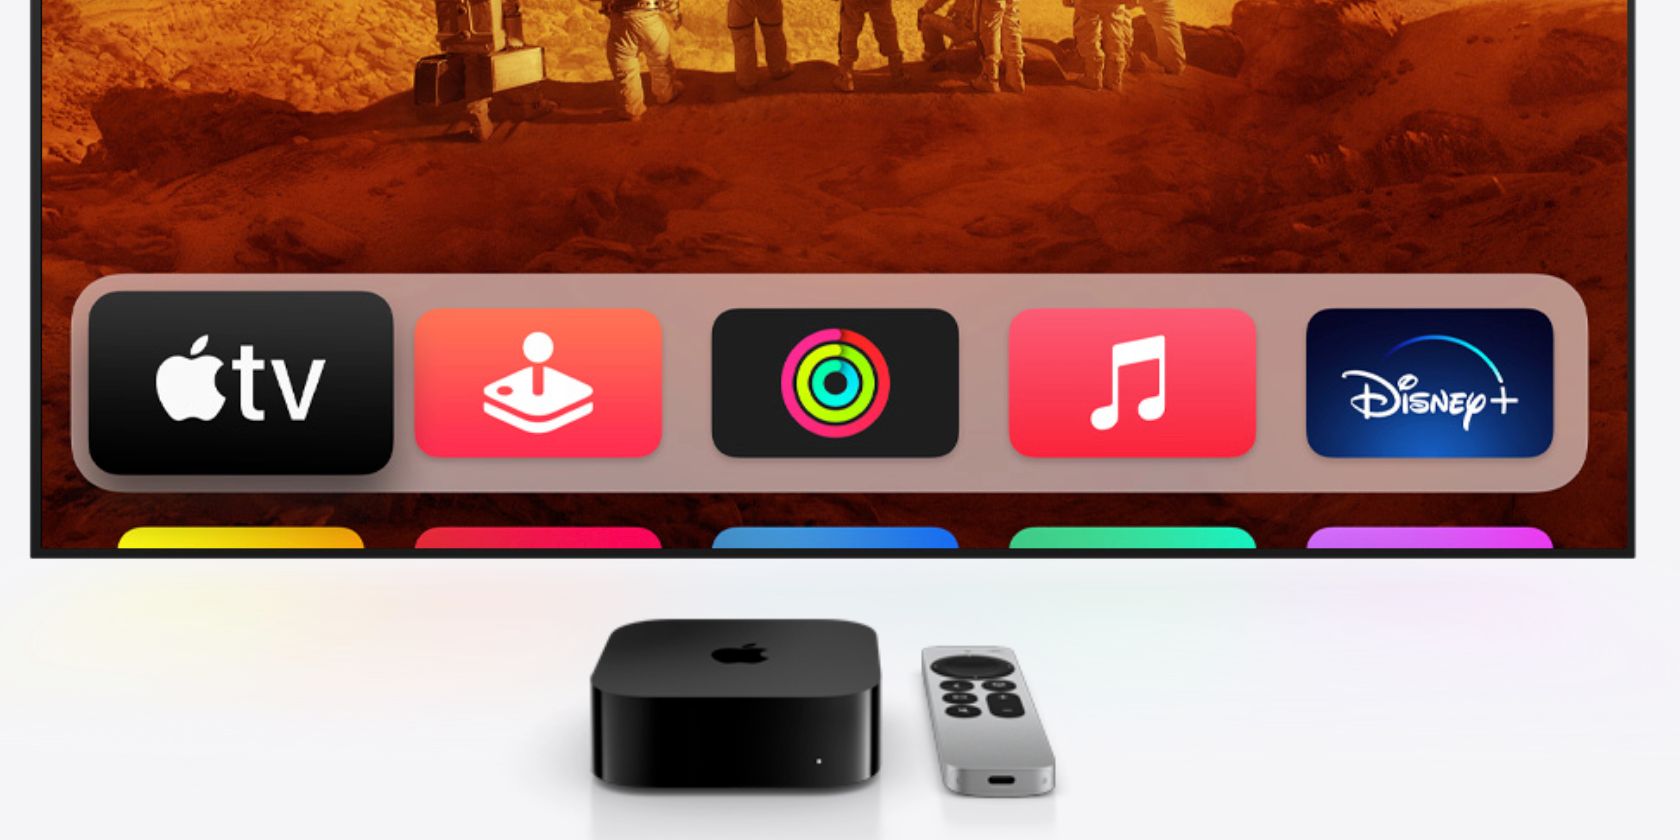 4 New Features of Apple TV 4K (3rd Generation)